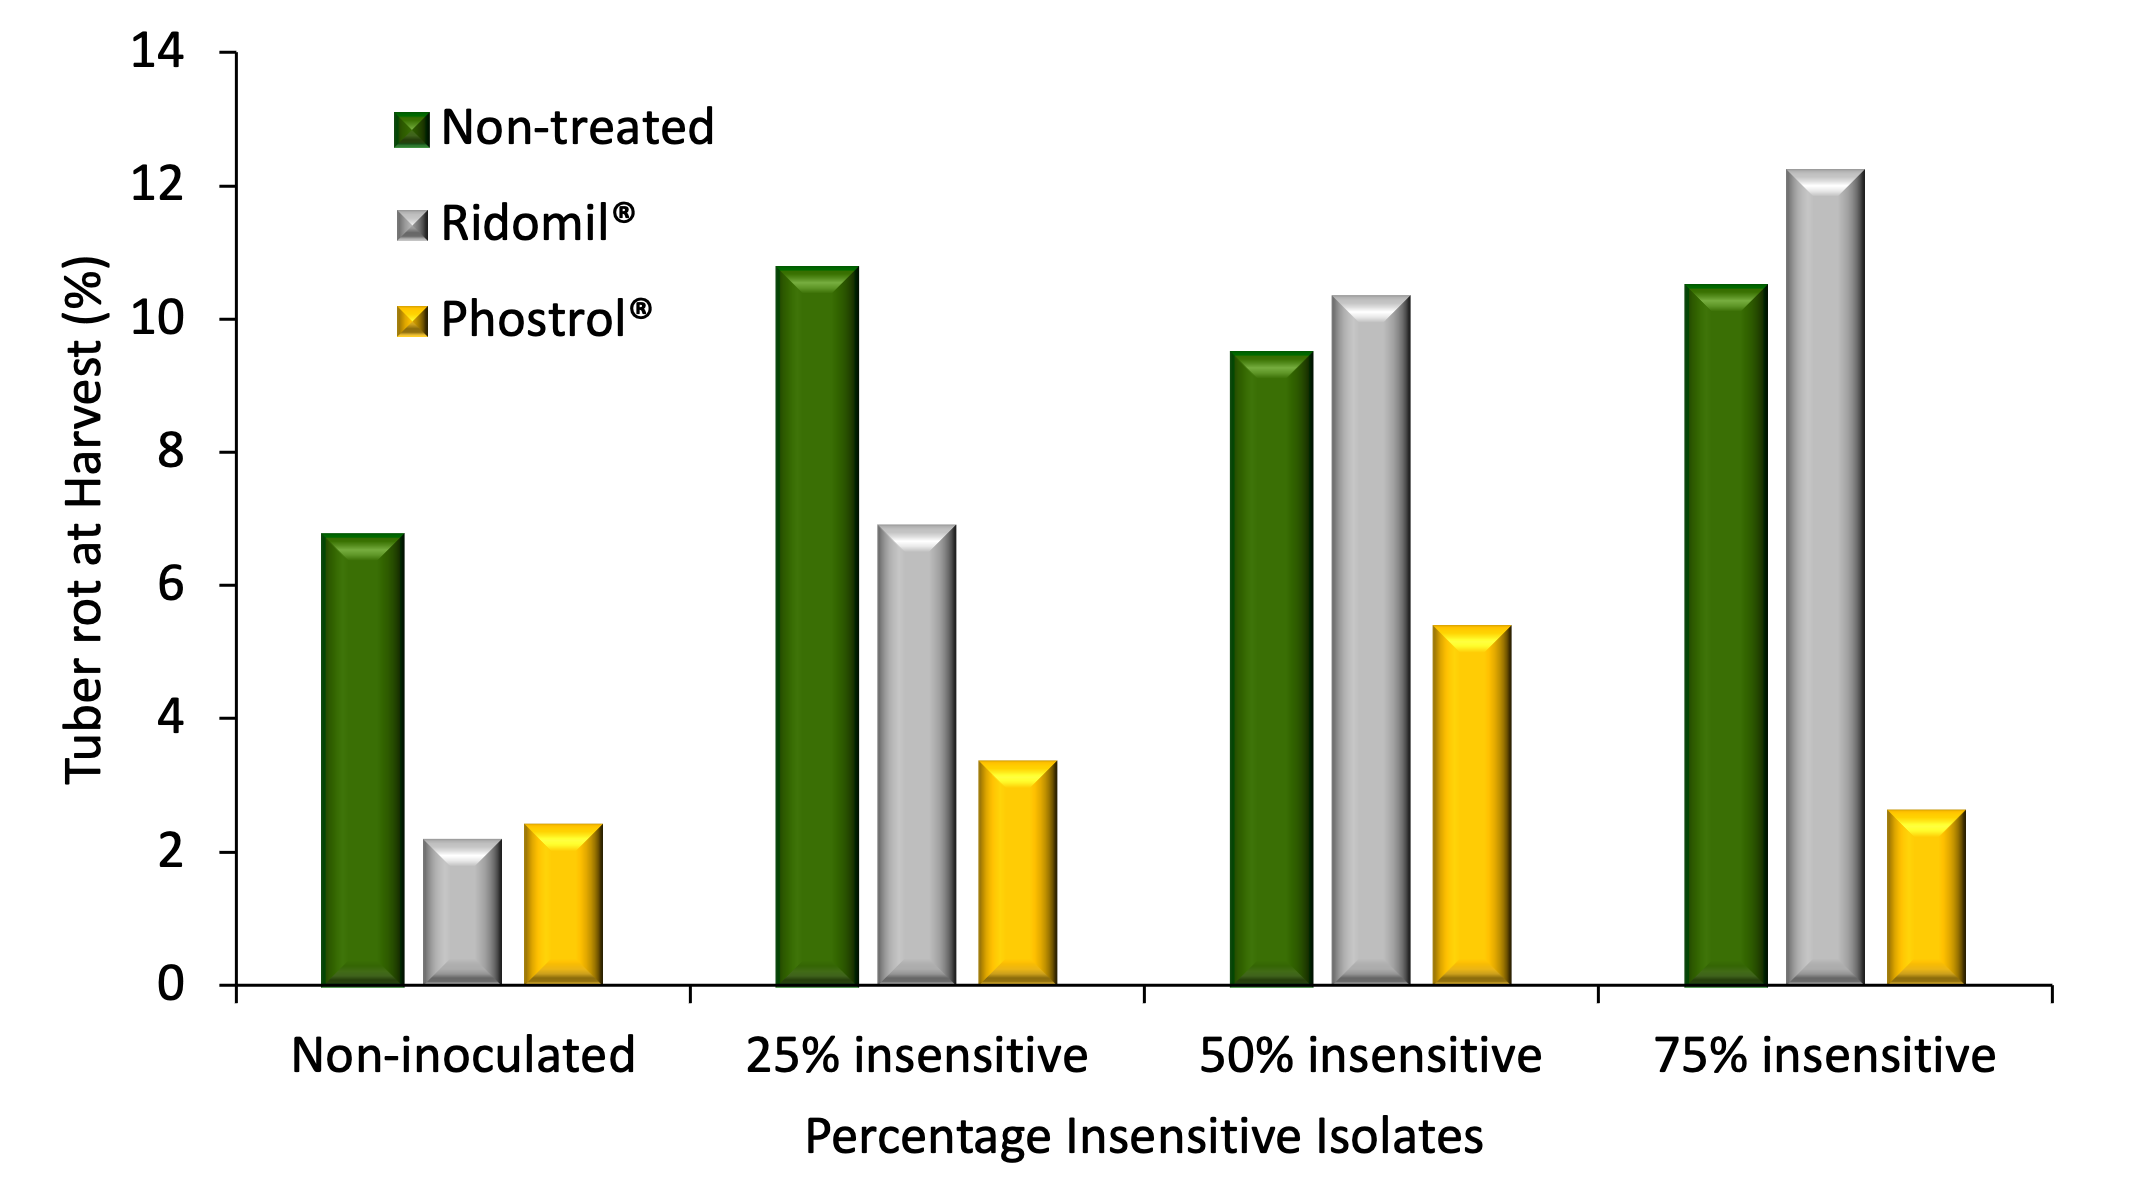 bar graph shows decreasing efficacy of metalaxyl/mefenoxam products where insensitive isolates are present